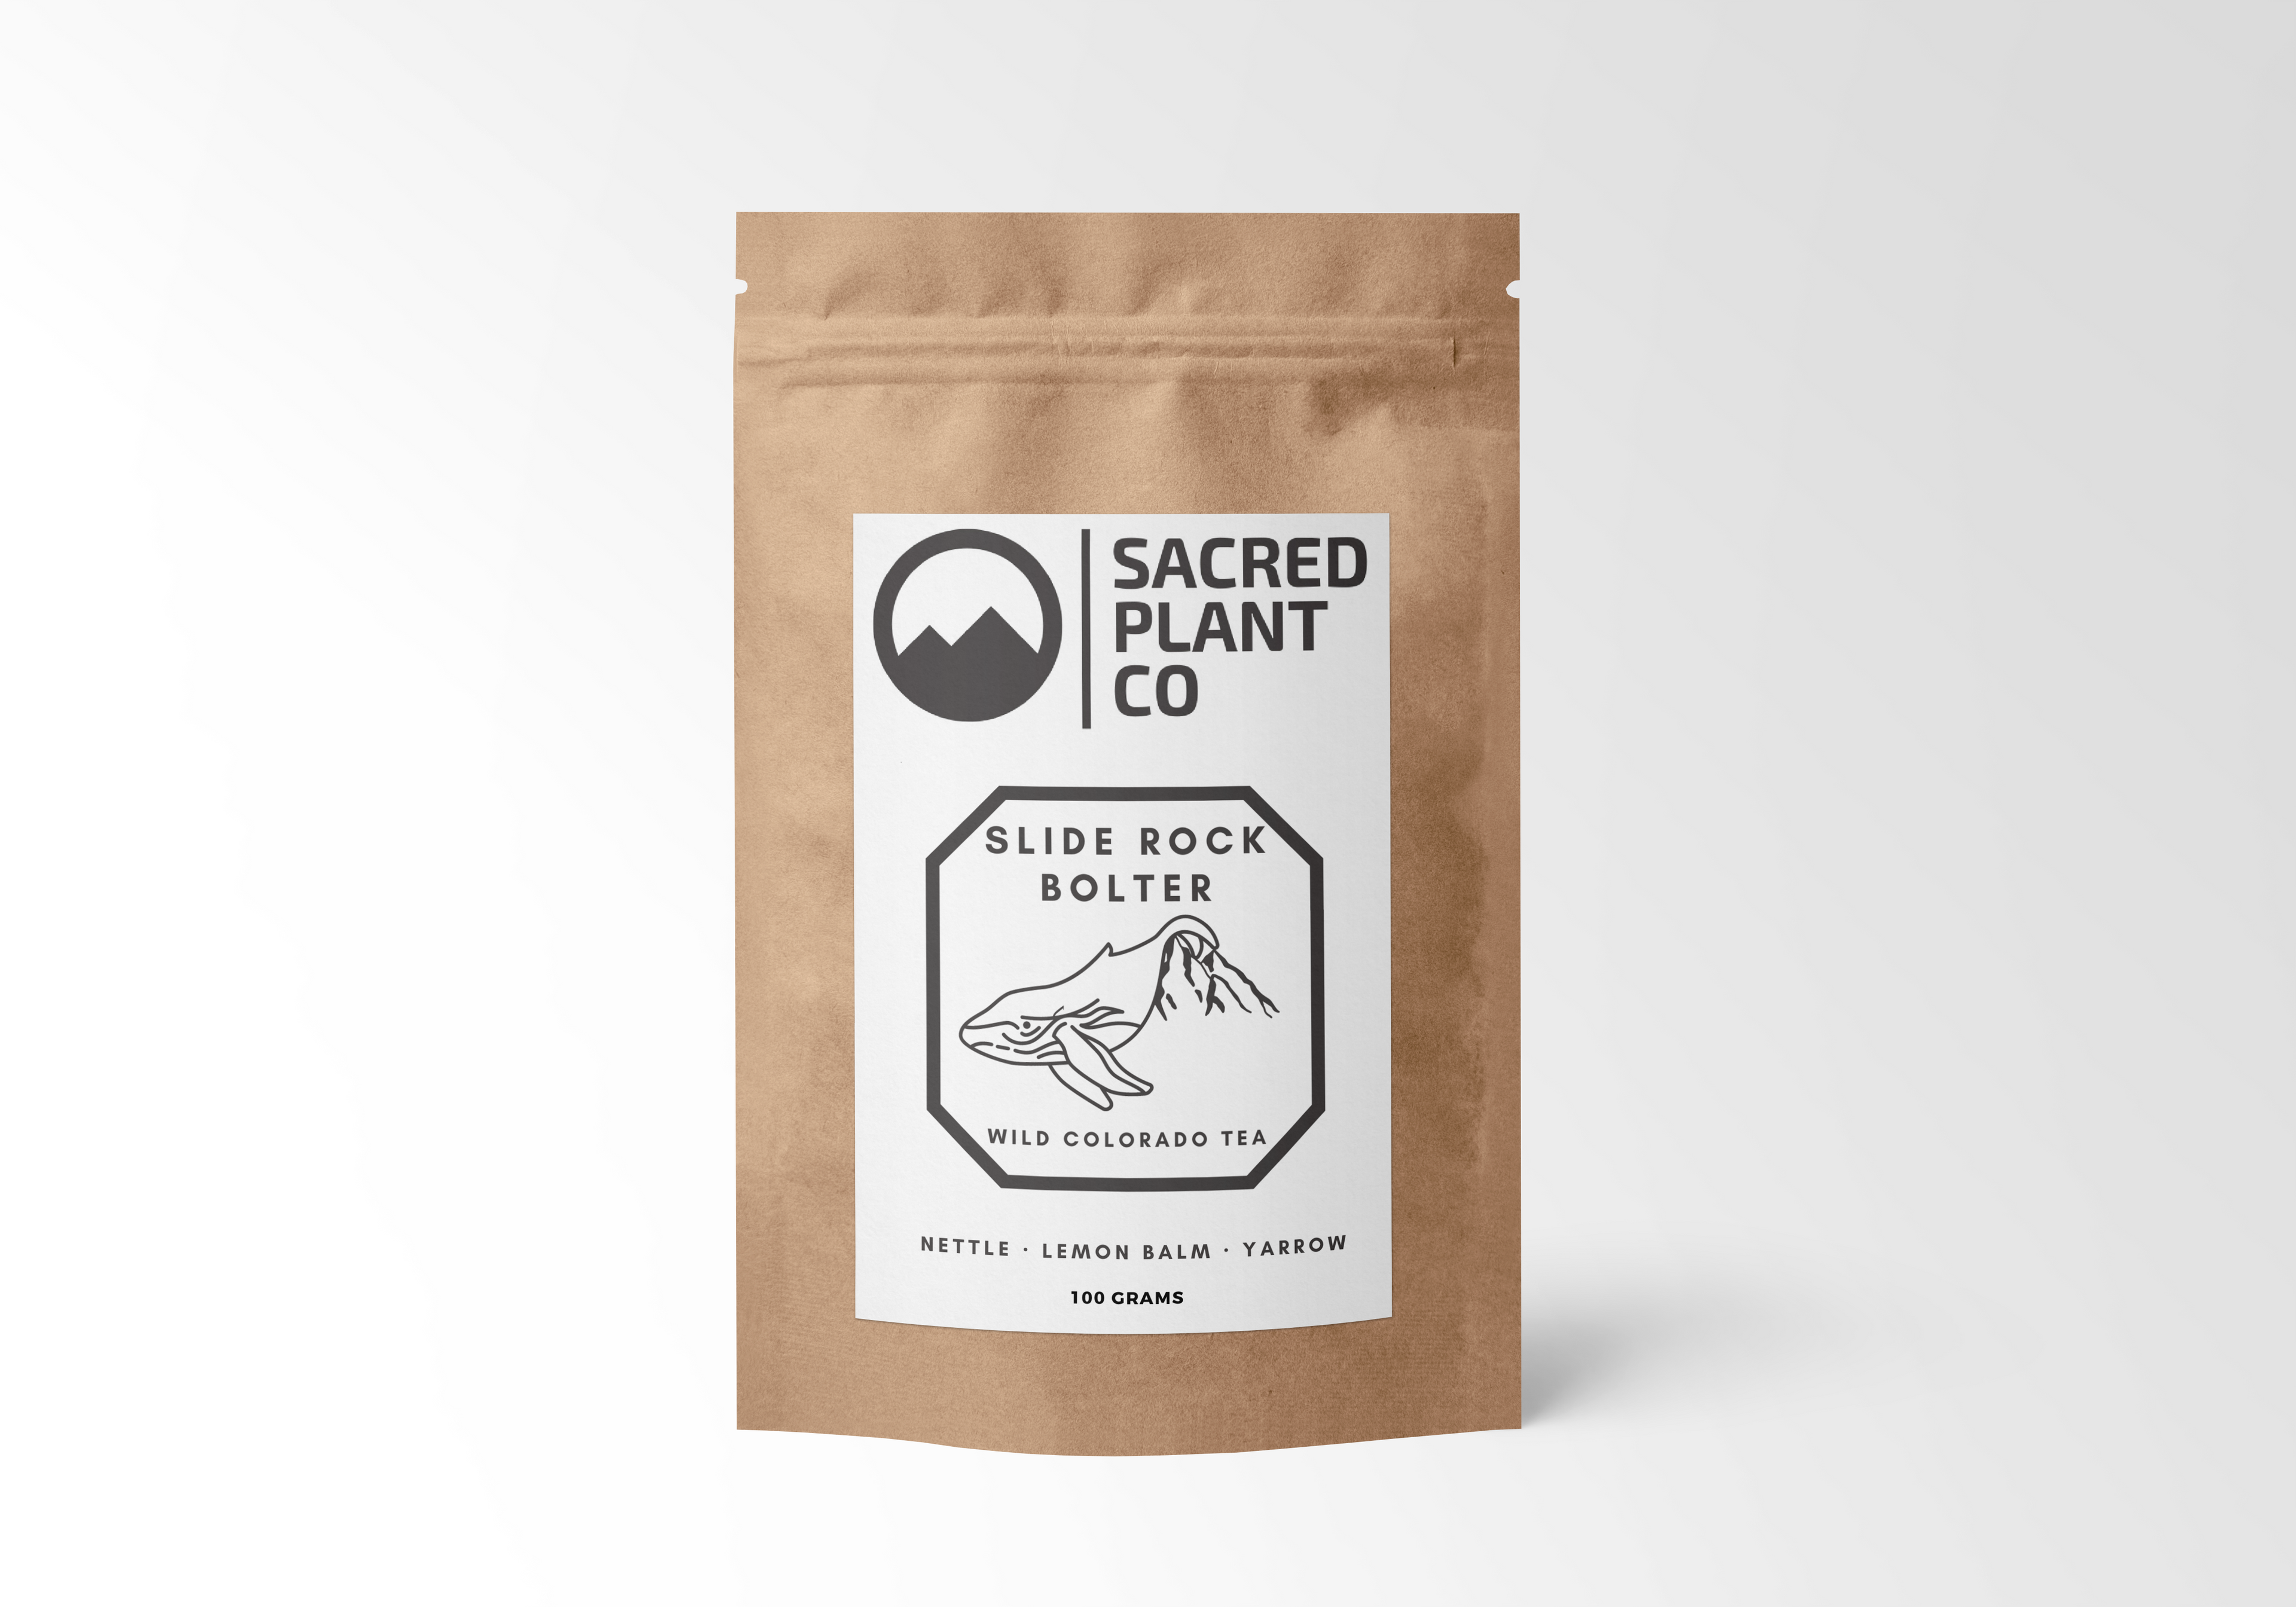 A kraft paper pouch from Sacred Plant Co showcases their Slide Rock Bolter Wild Colorado Tea. The clean, white background accentuates the pouch&